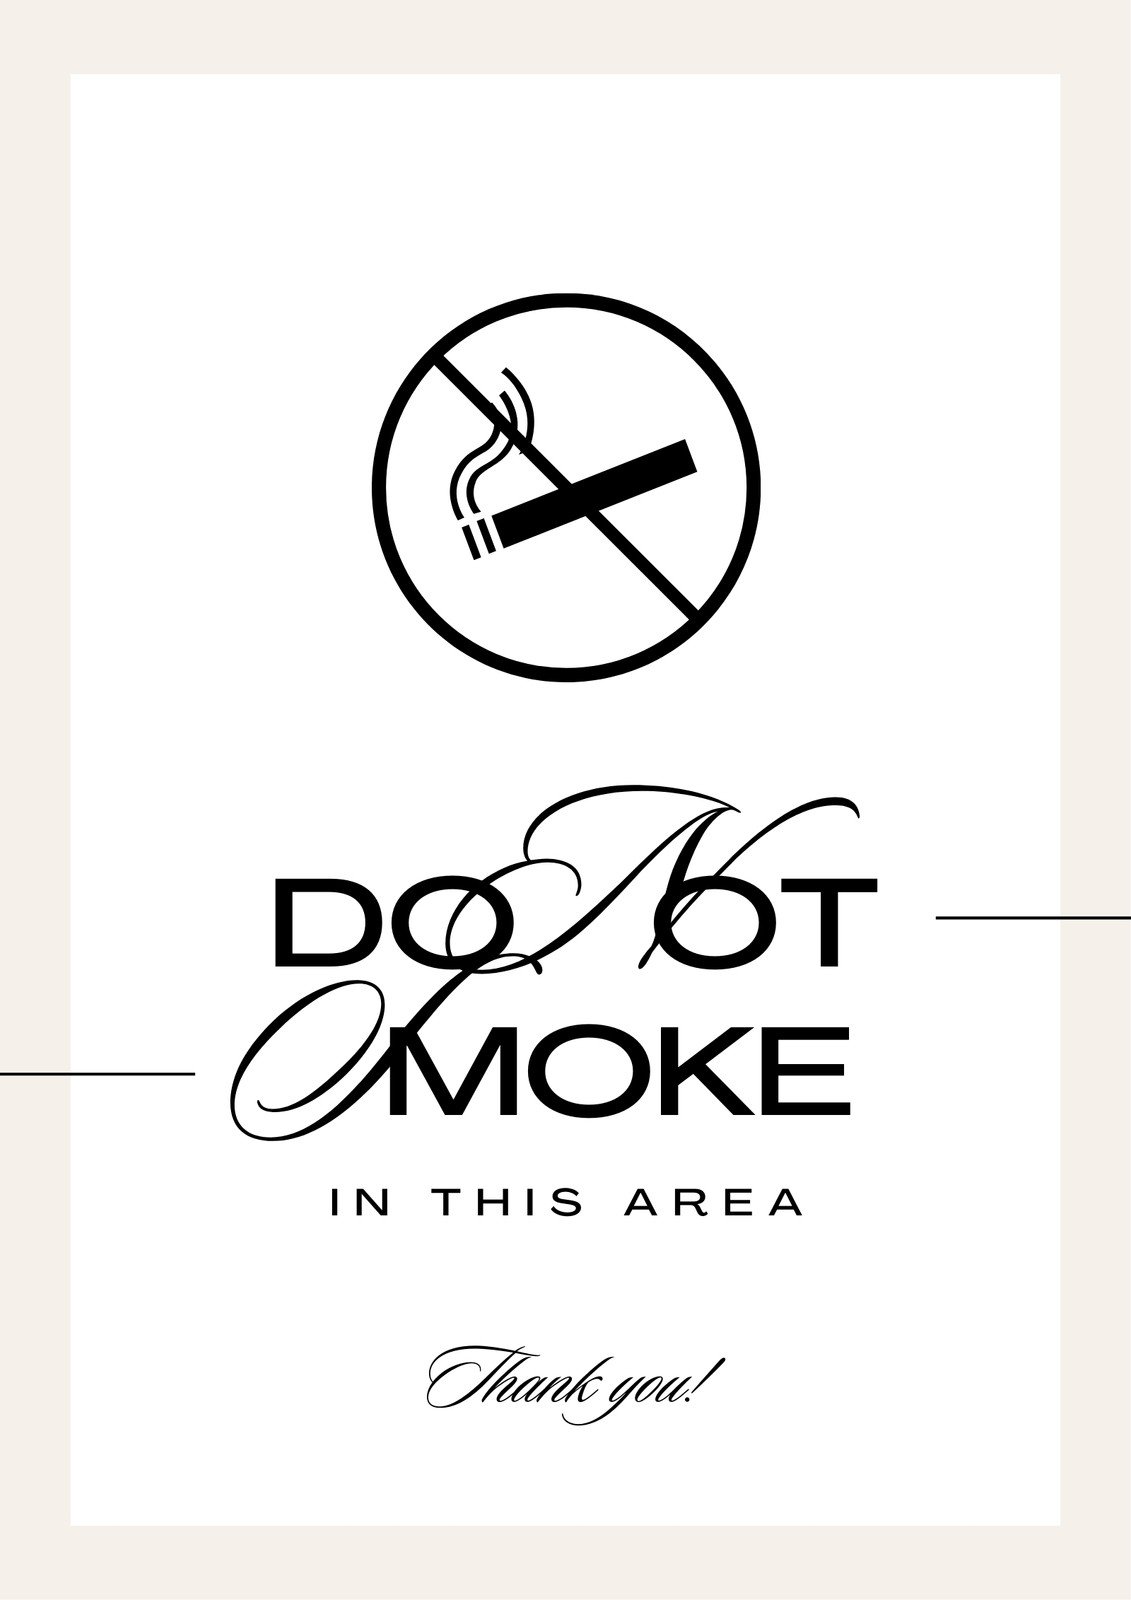 No smoking symbol Images - Search Images on Everypixel